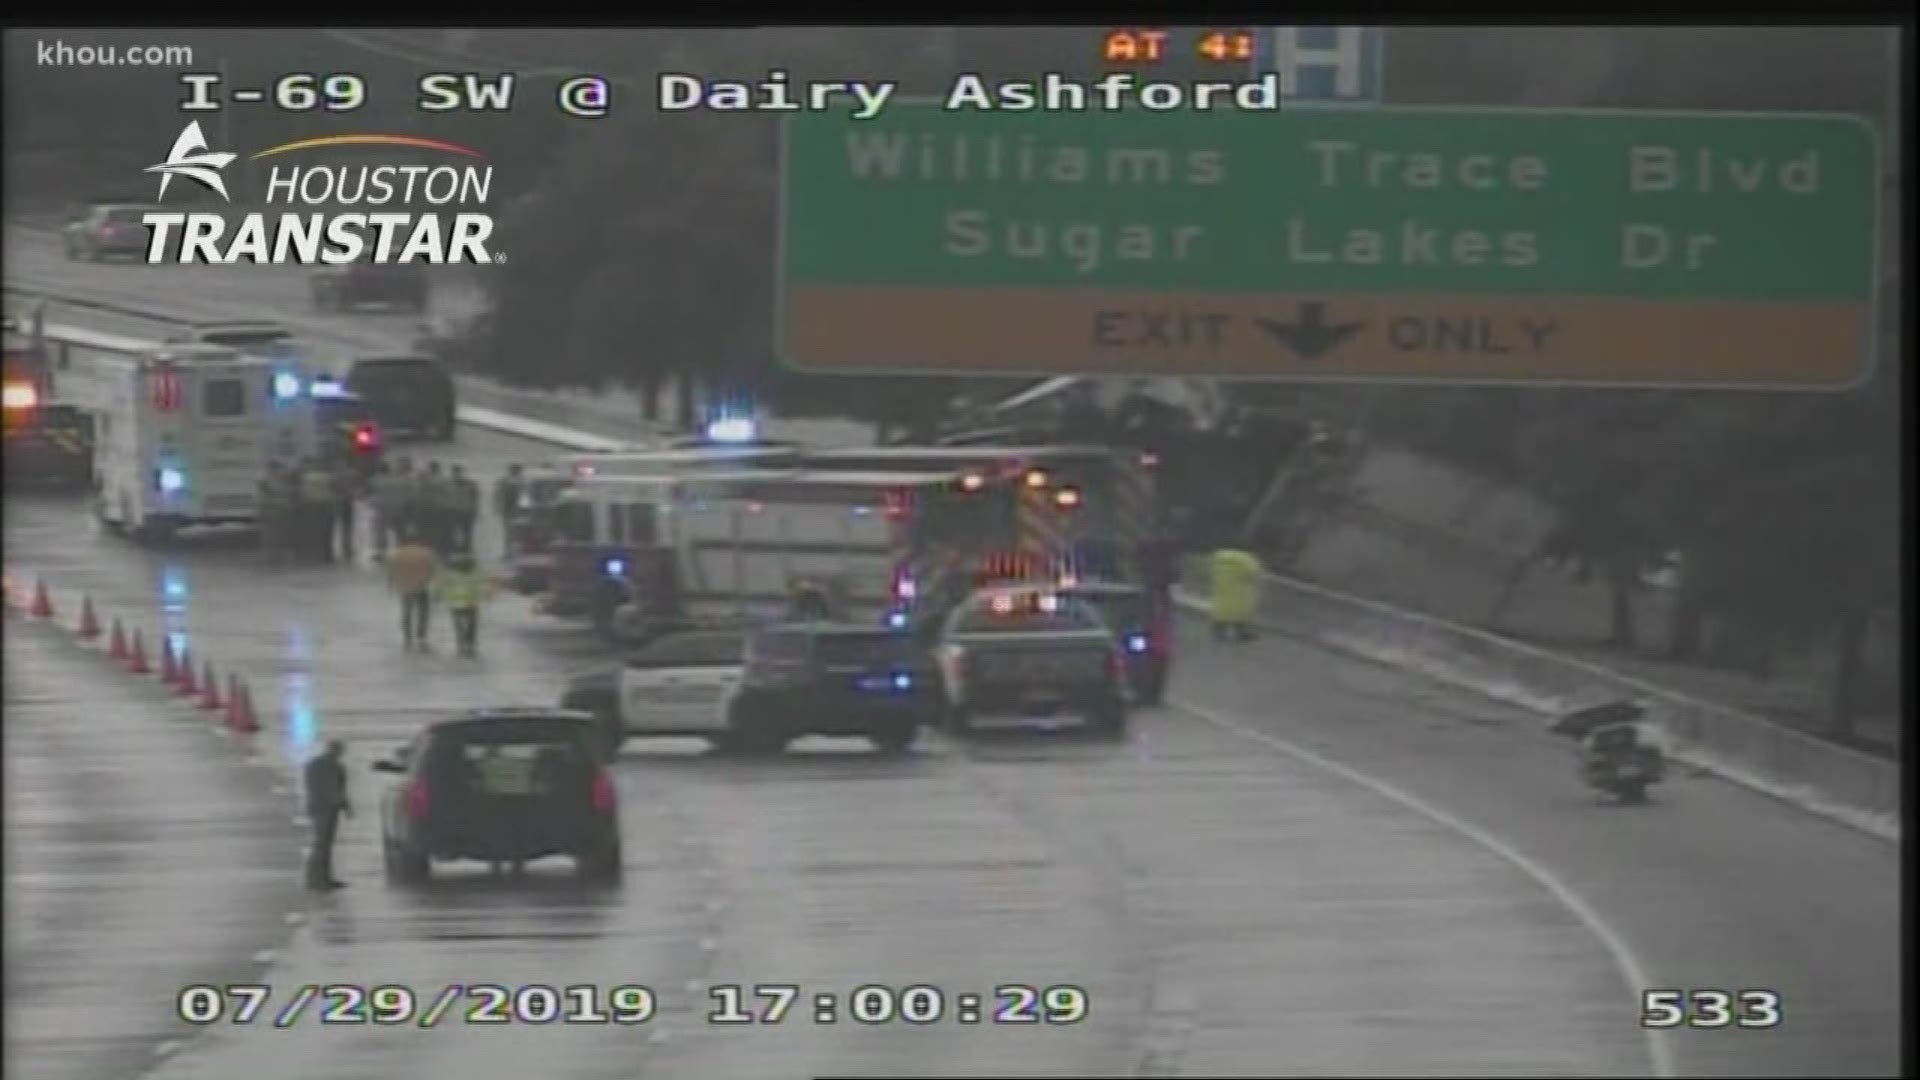 An overturned 18-wheeler shut down all southbound lanes of the Southwest Freeway near Diary Ashford.